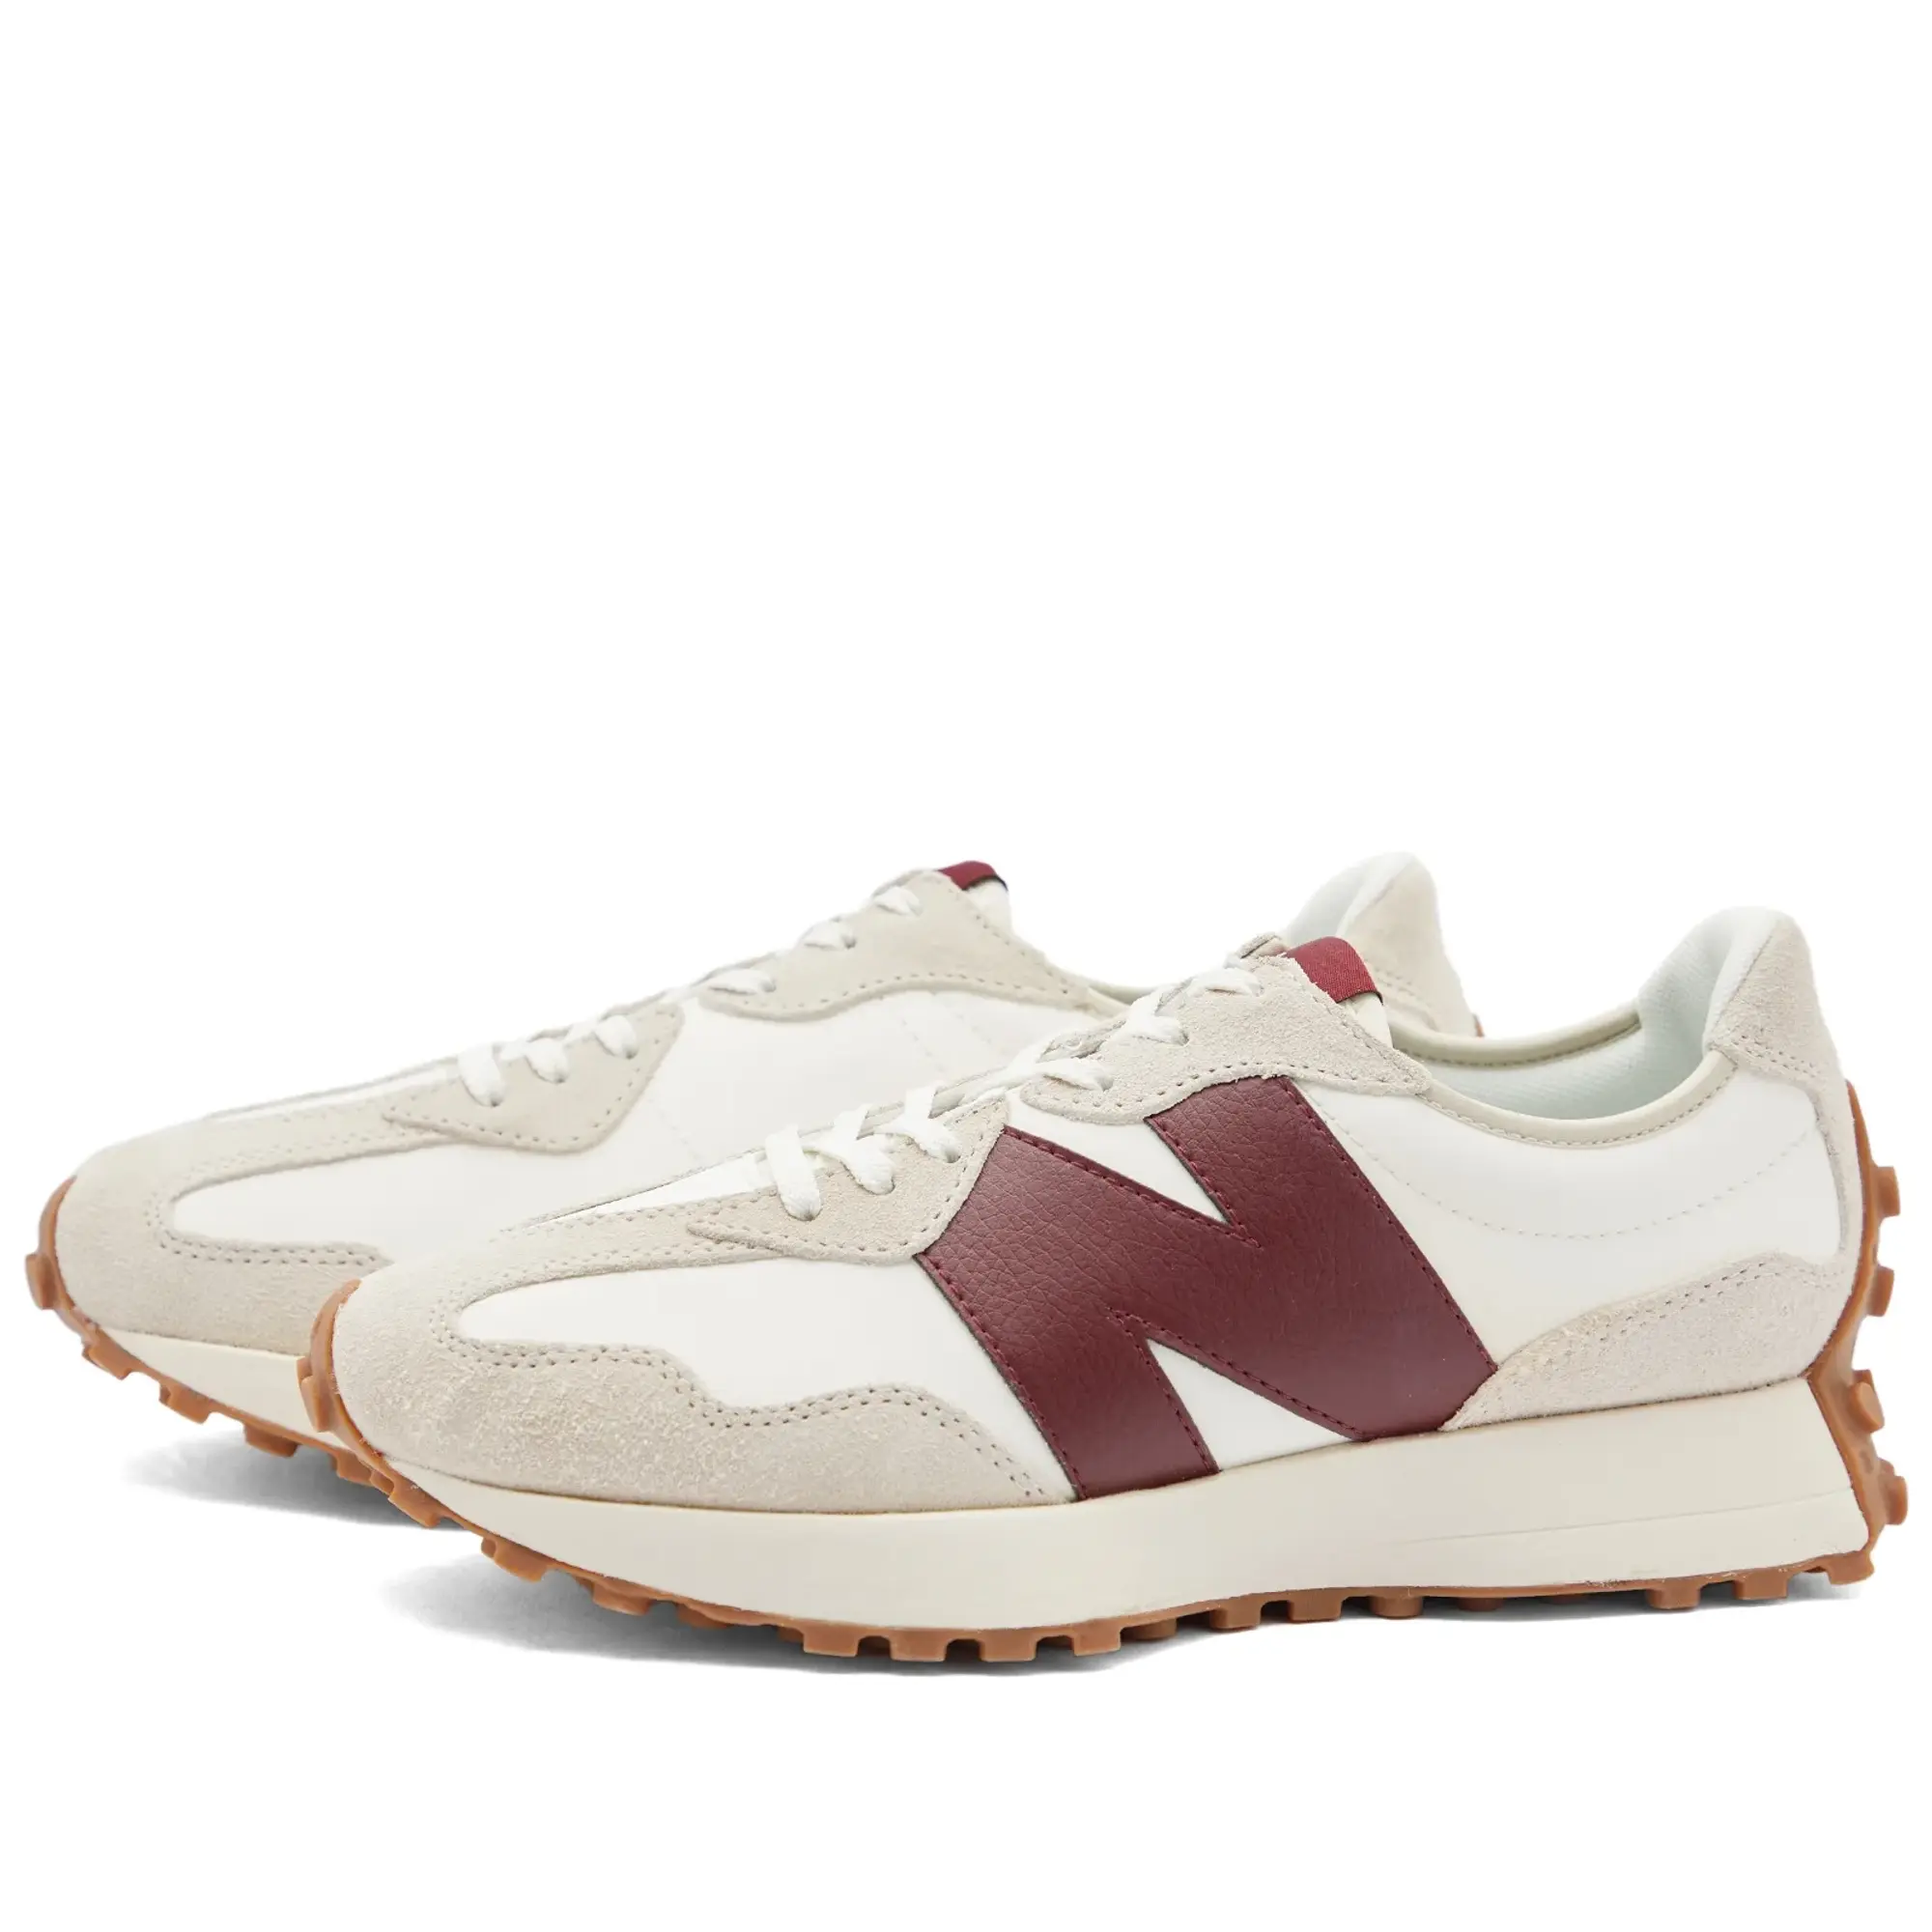 New Balance 327 Sneakers In Off White And Burgundy - White